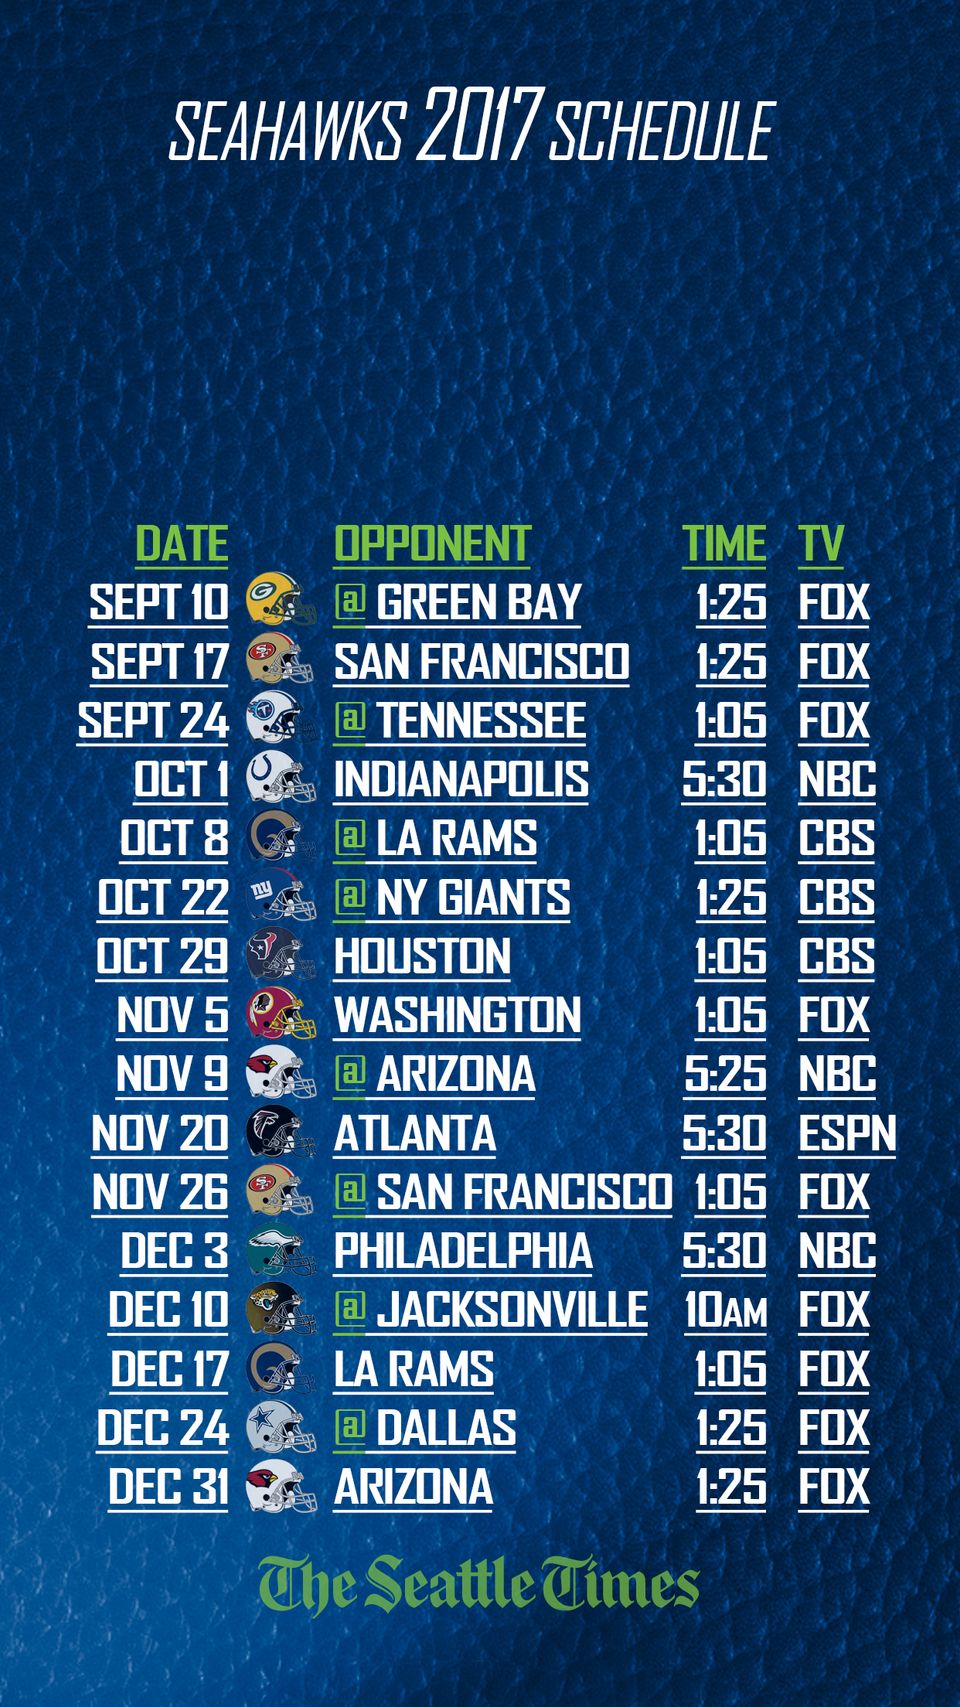 Print and save your own 2017 Seahawks schedule The Seattle Times